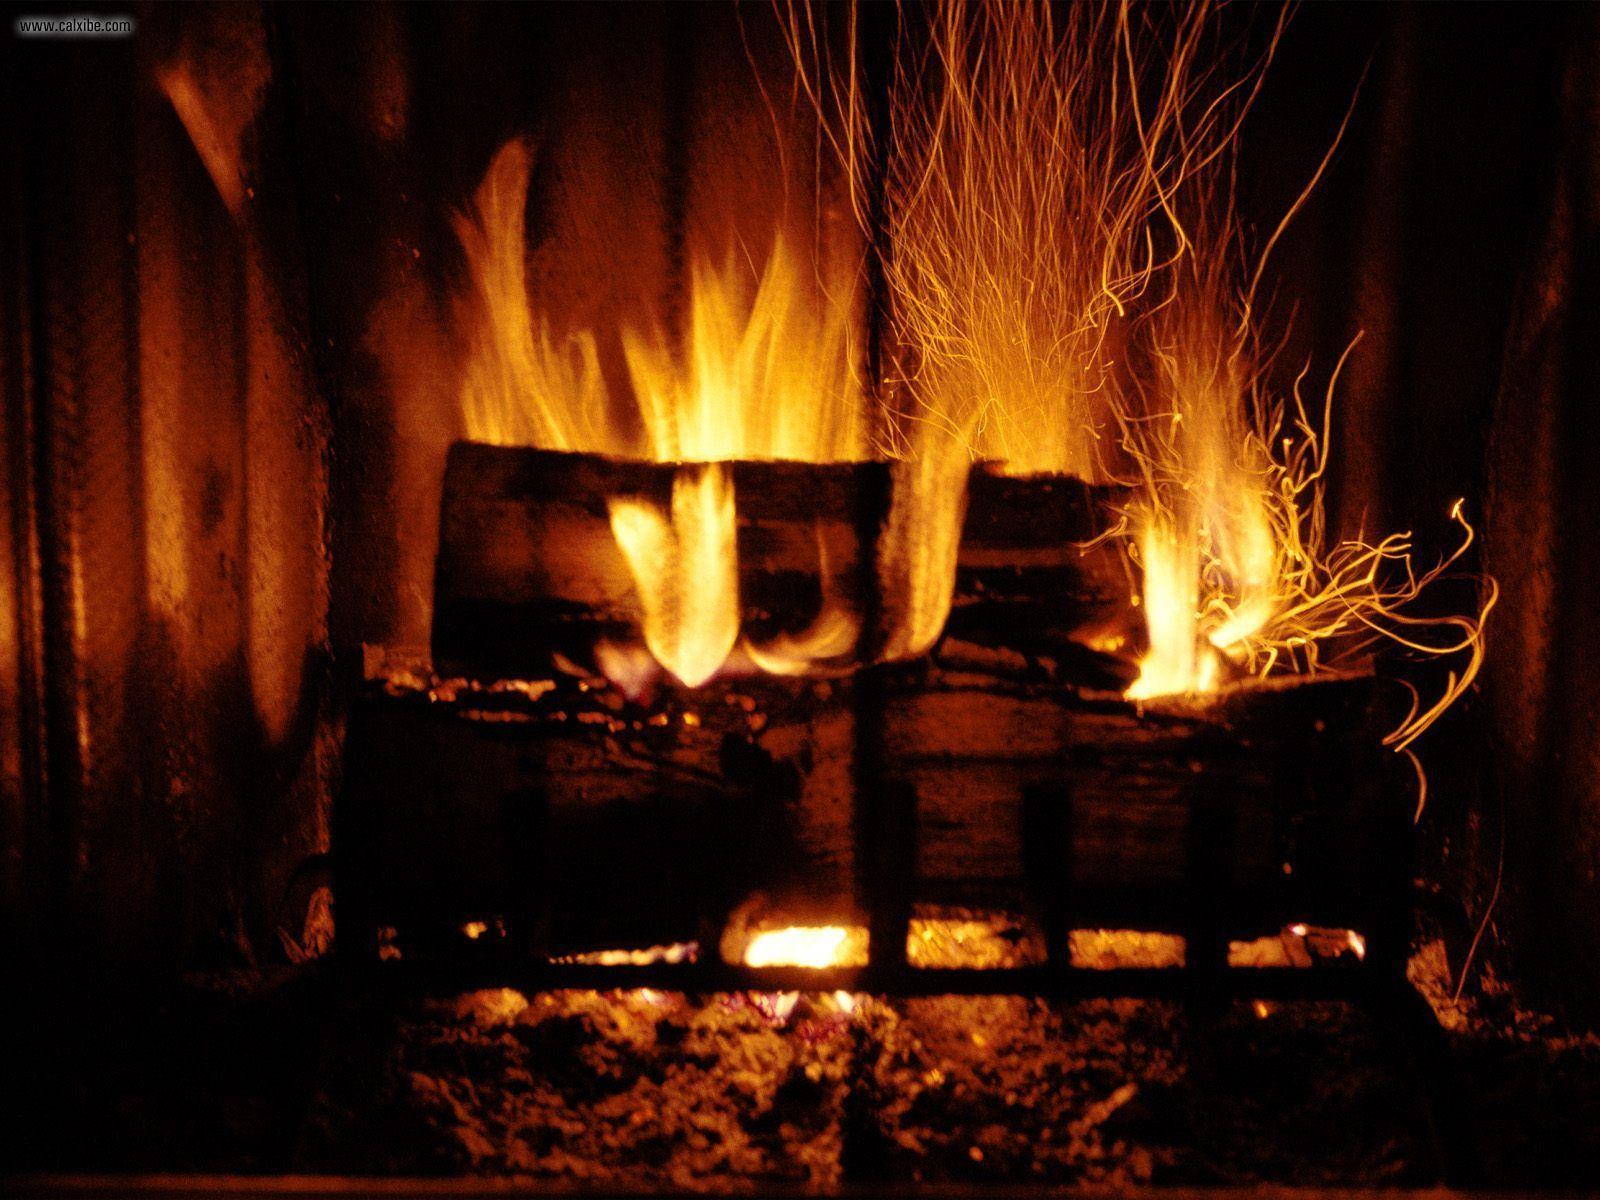 Miscellaneous: Roaring Fire, picture nr. 23027